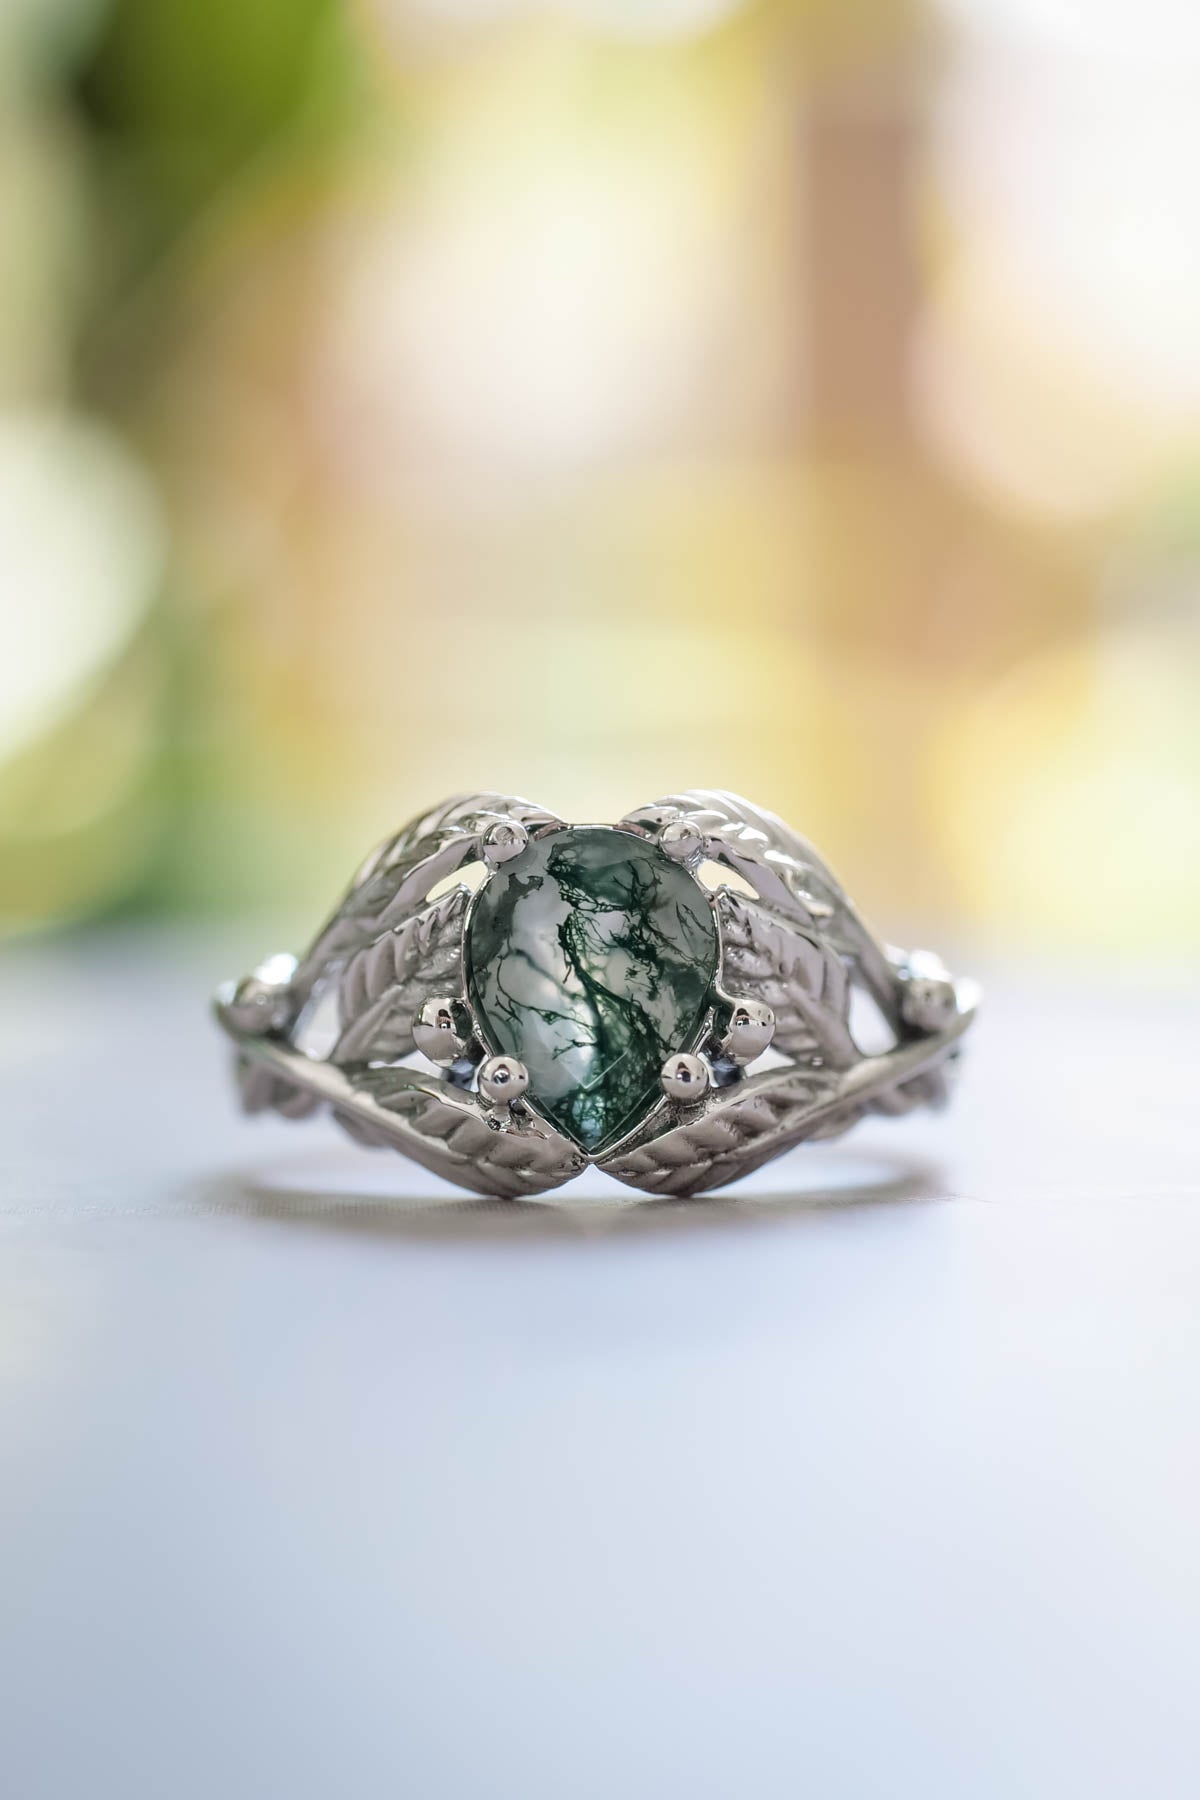 Natural moss agate engagement ring, tree branch ring / Viola - Eden Garden Jewelry™